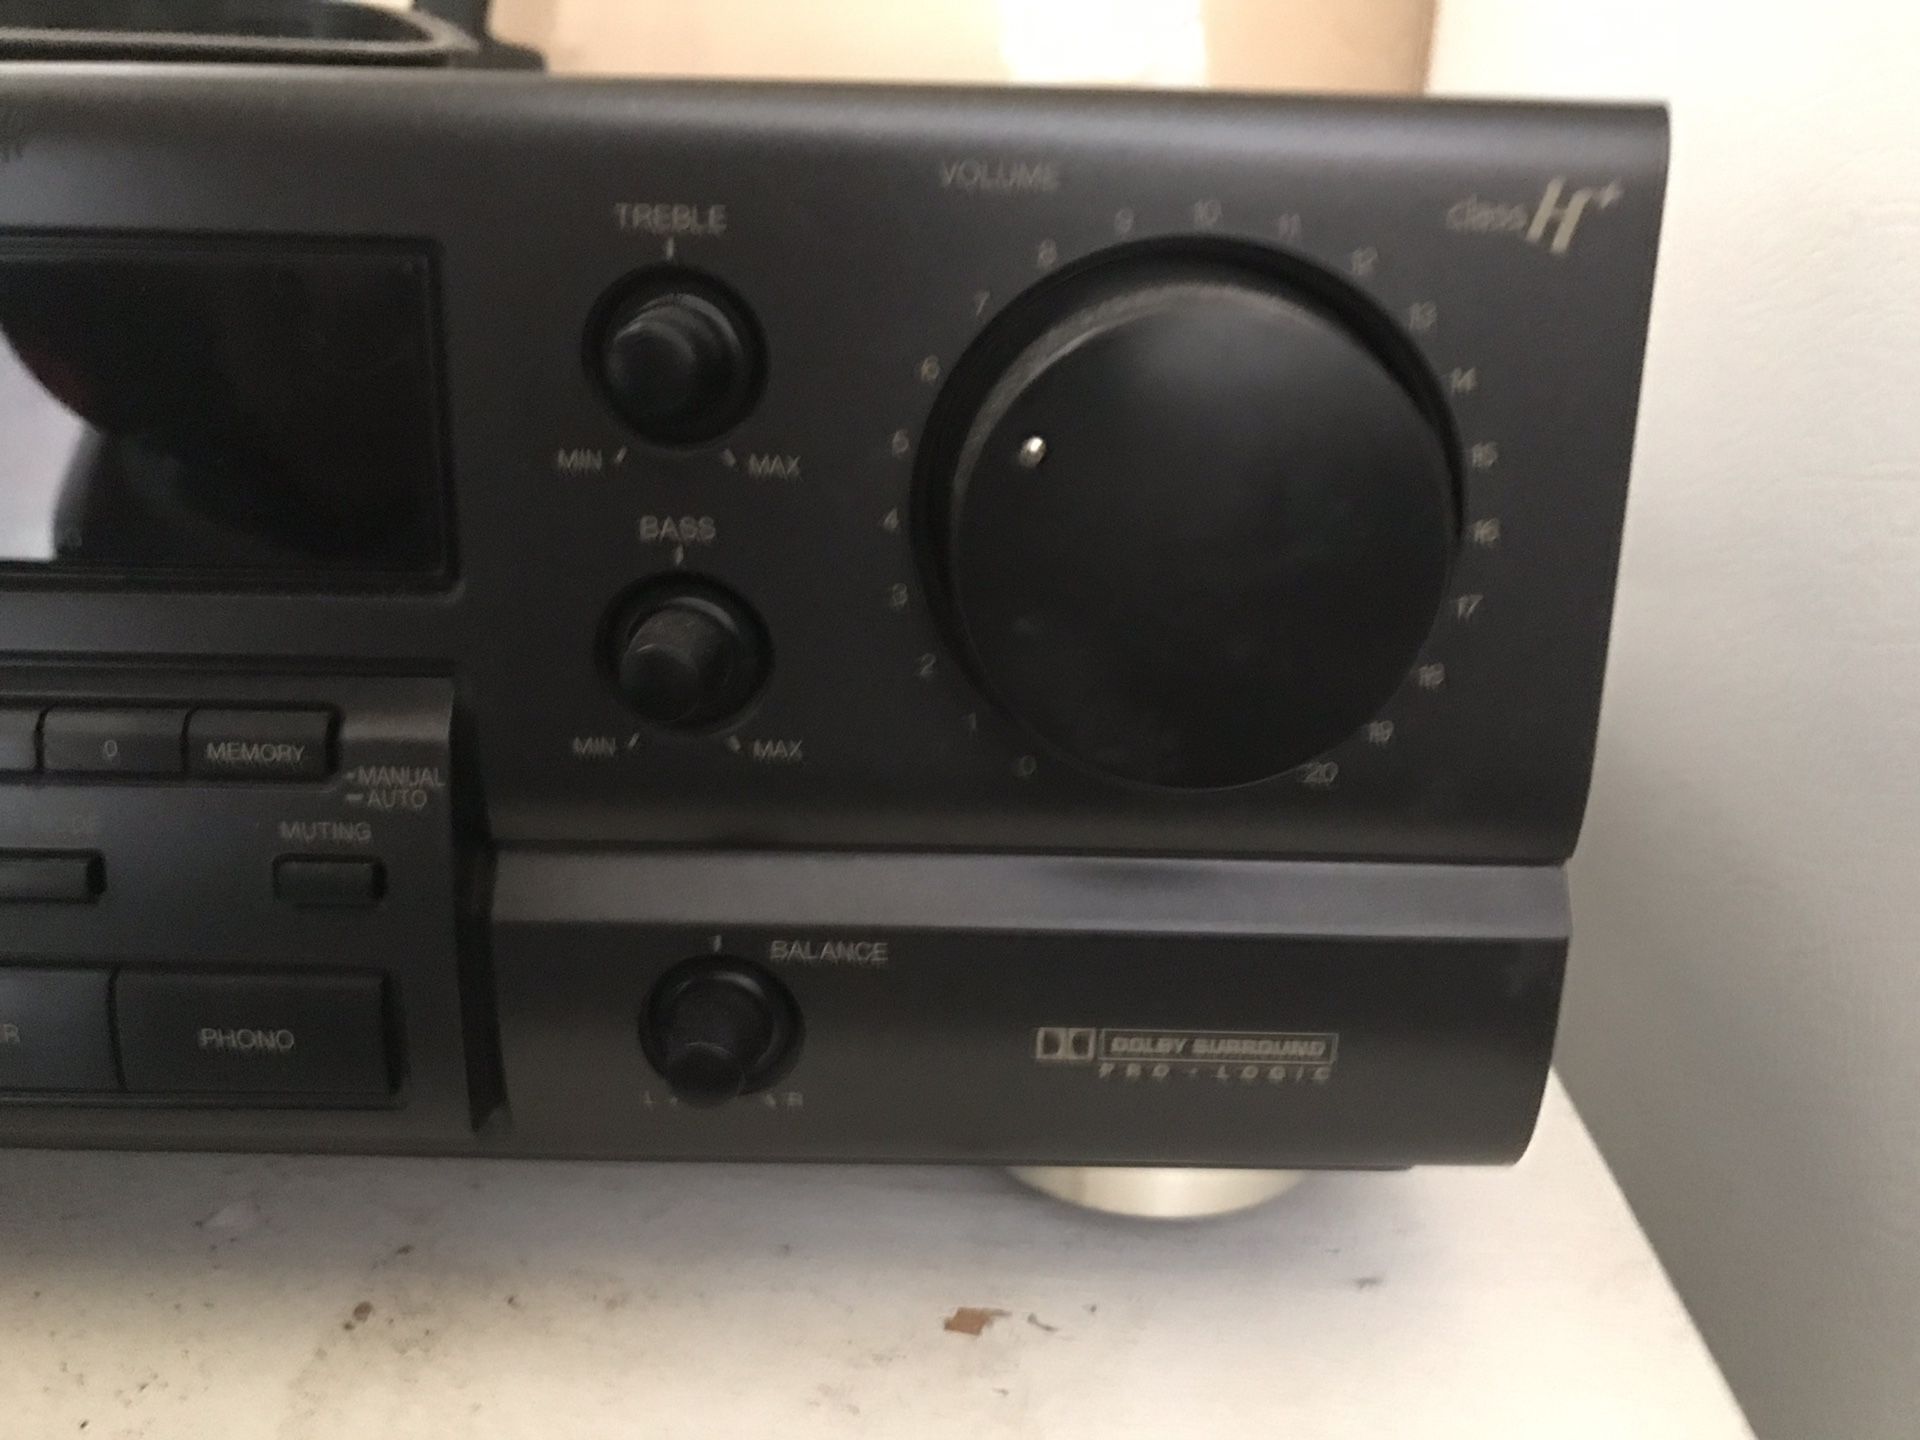 Stereo receiver and speakers